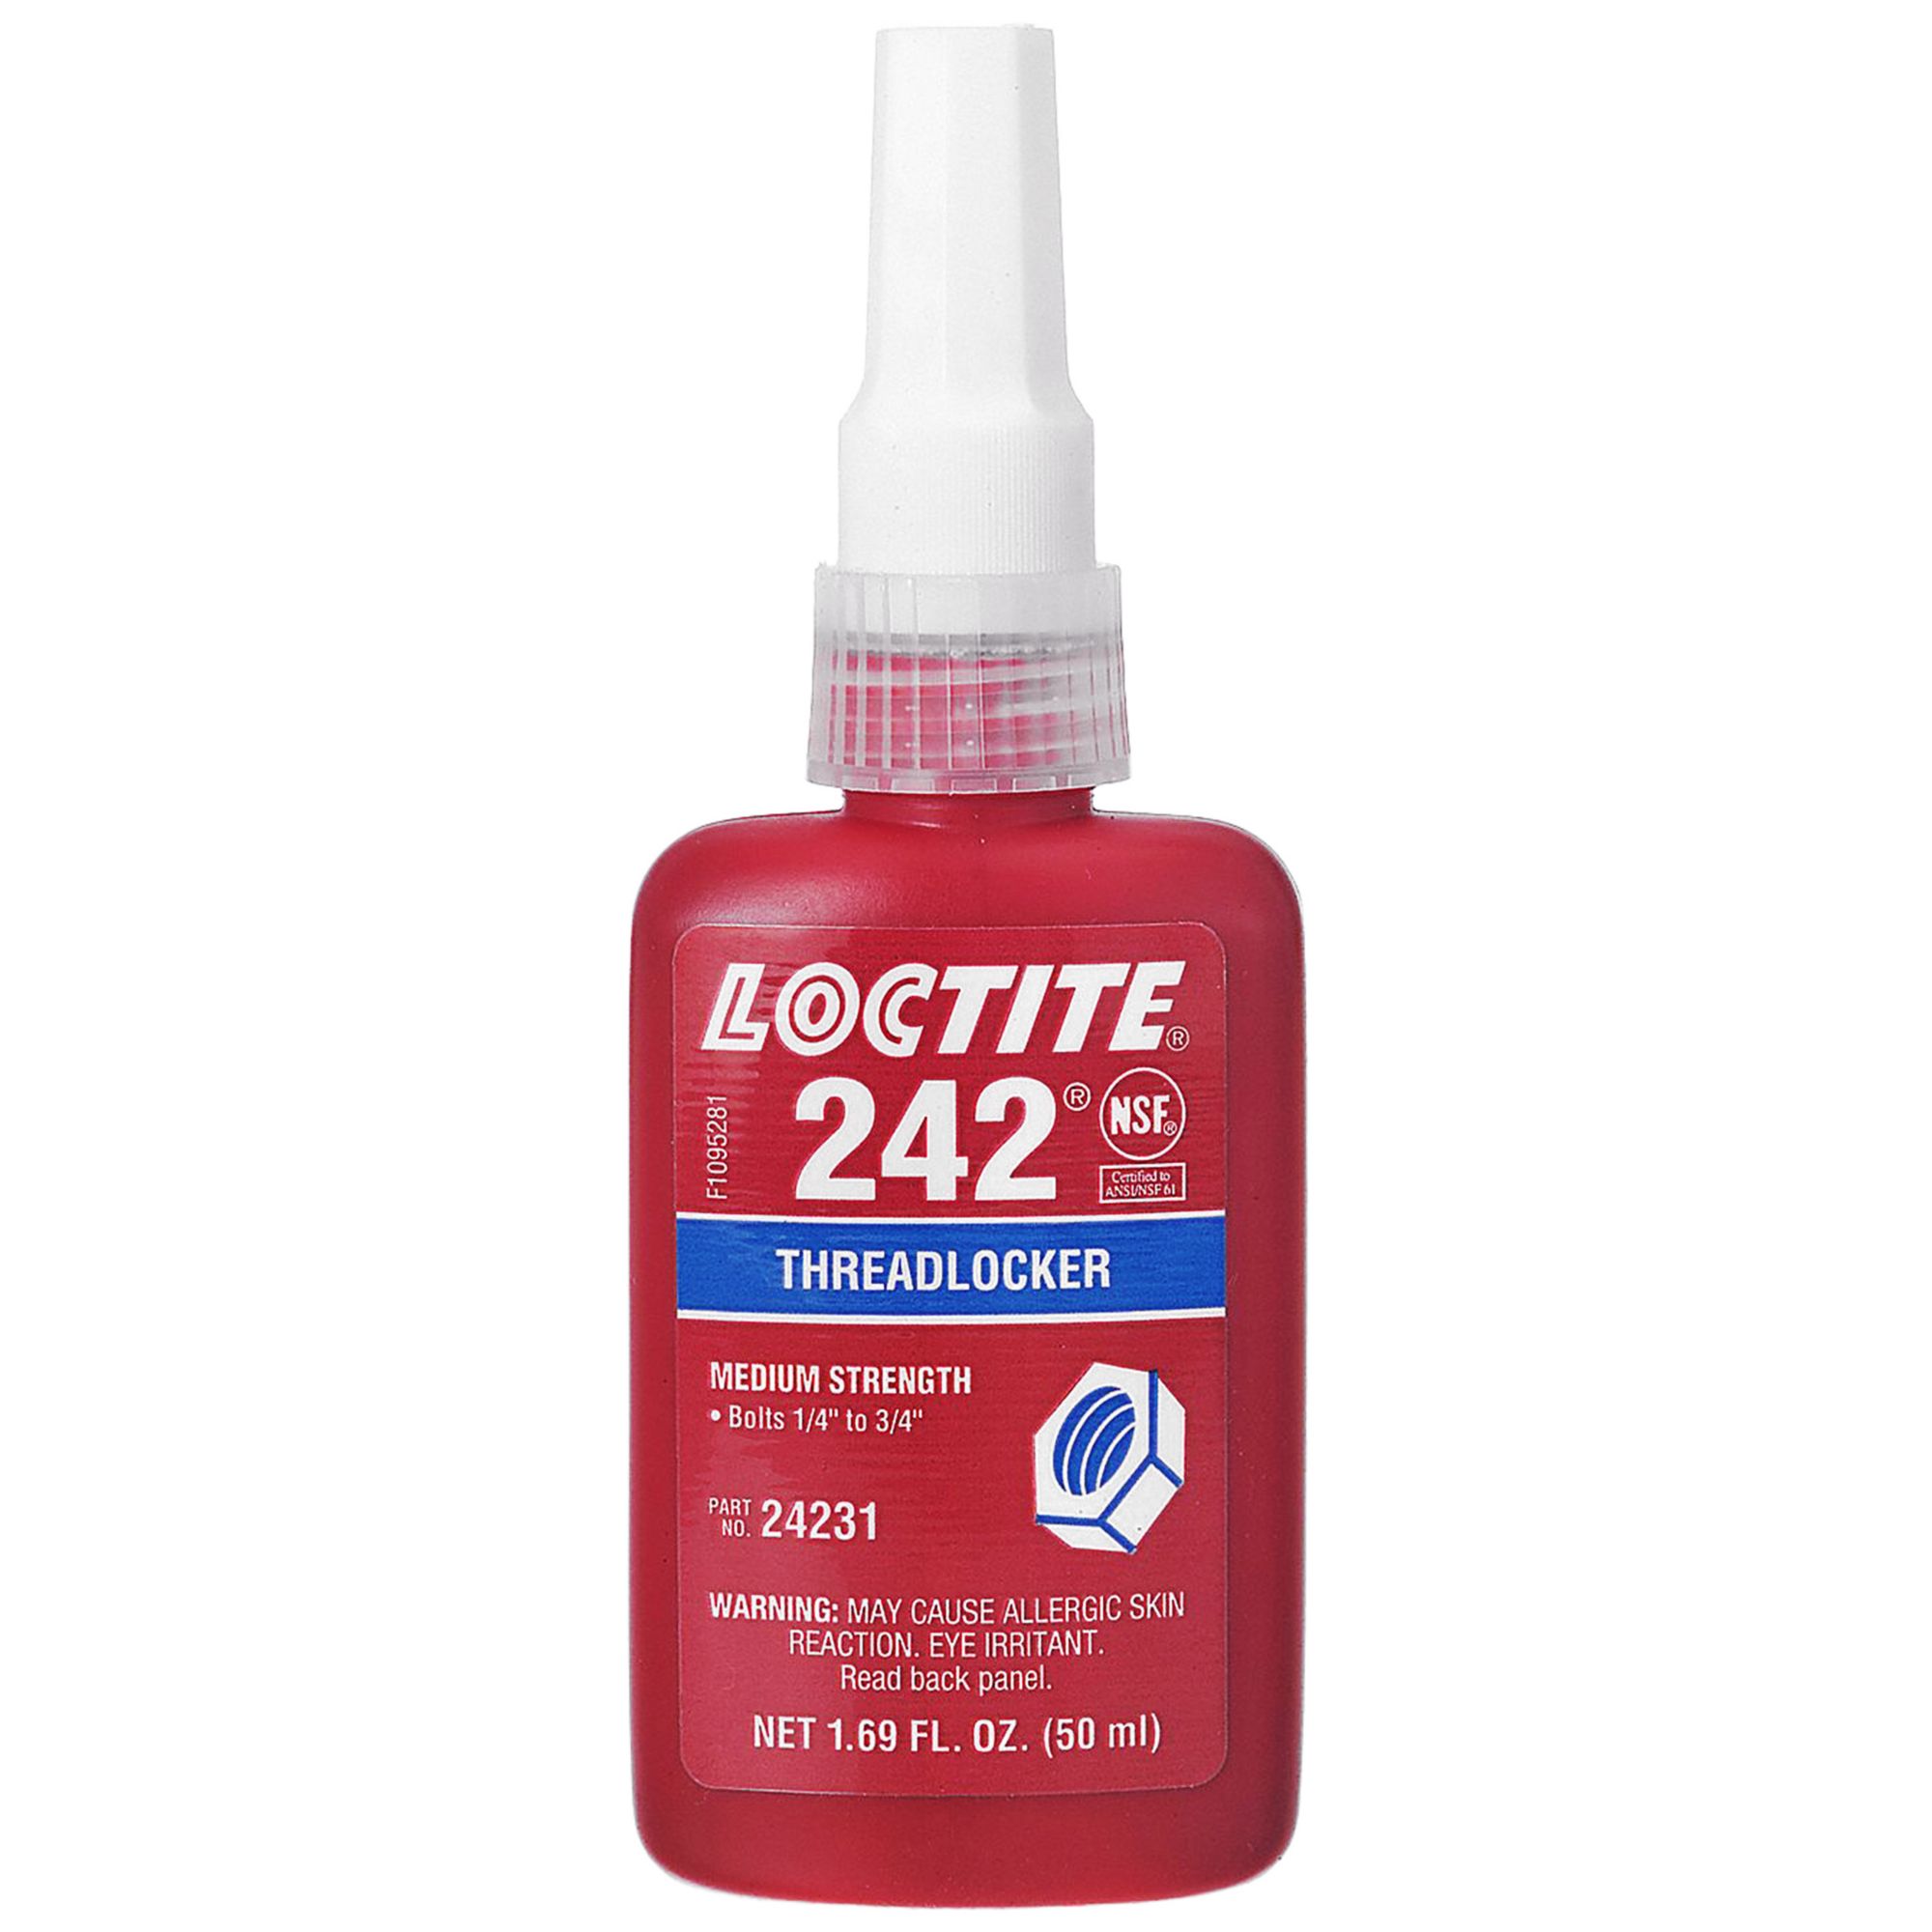 LOCTITE MR 5416 ALL PURPSP ADH - Strobels Supply